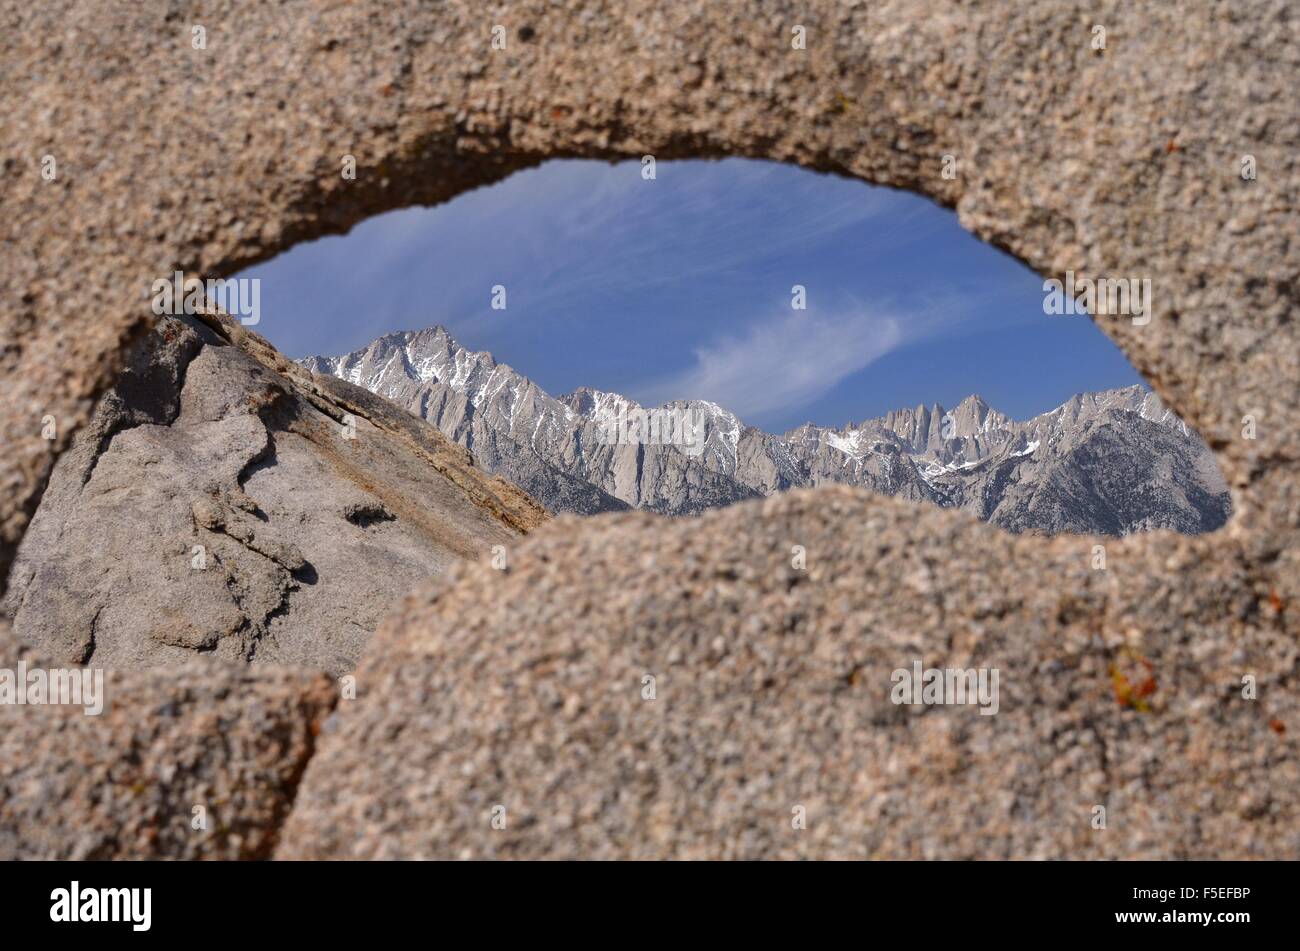 Mount whitney seen through a natural arch, California, United States Stock Photo